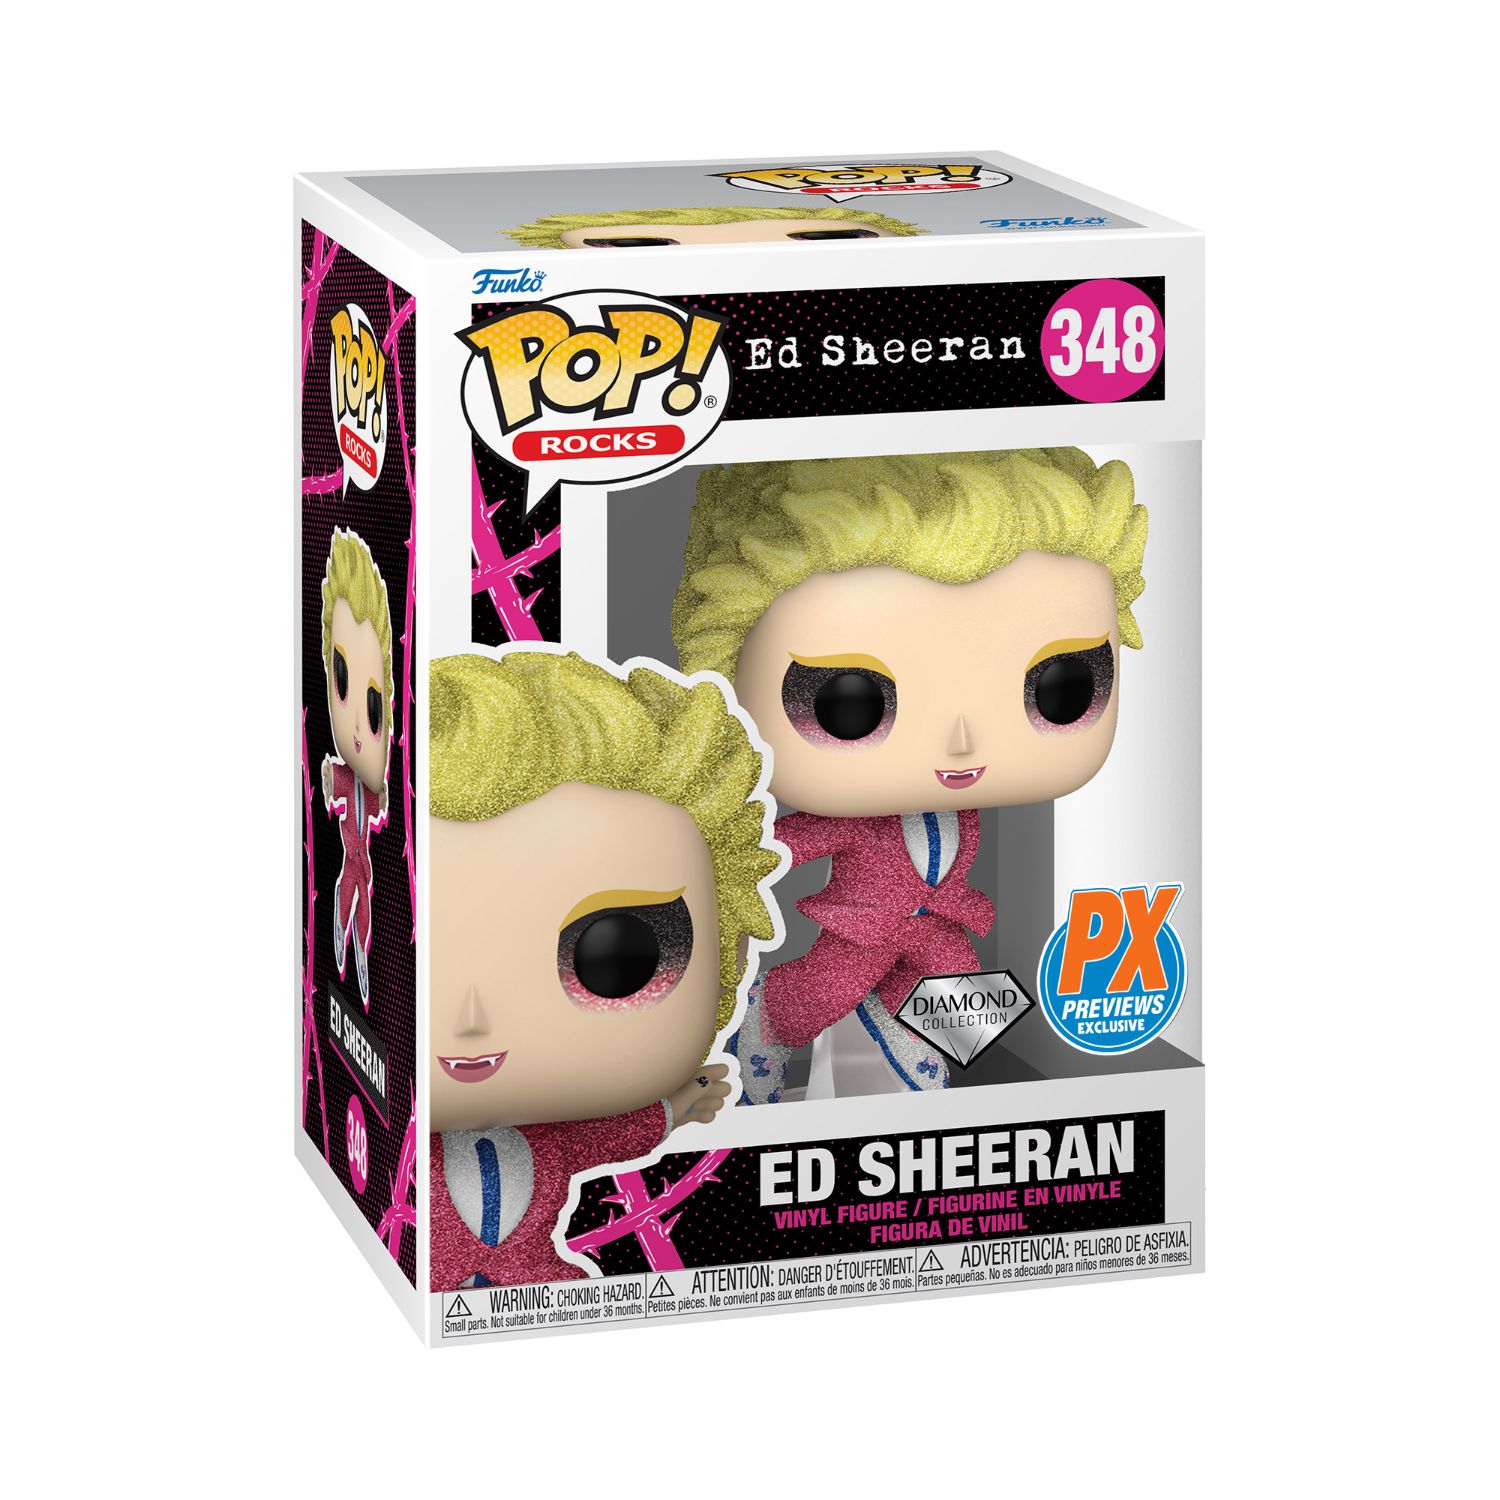 English singer and songwriter, Pop! Ed Sheeran, is here to take the stage in your Pop! Rocks collection! This exclusive, Diamond Collection Pop! Ed Sheeran has donned the pink suit from his “Bad Habits” music video.